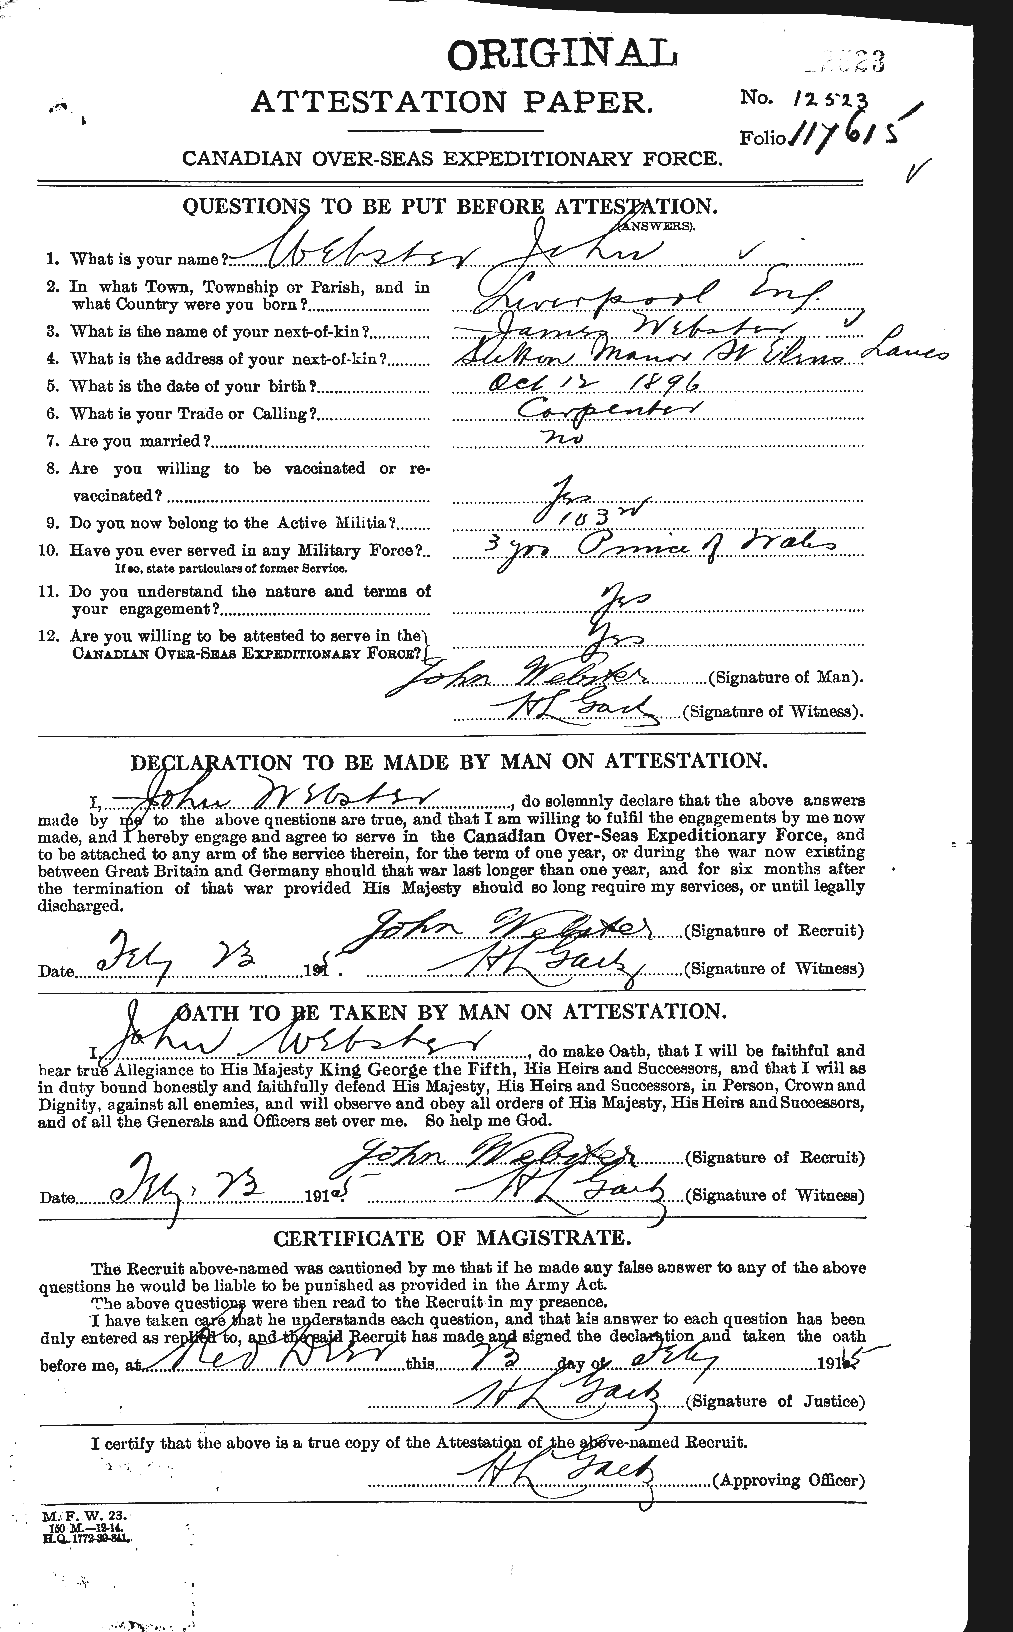 Personnel Records of the First World War - CEF 670479a